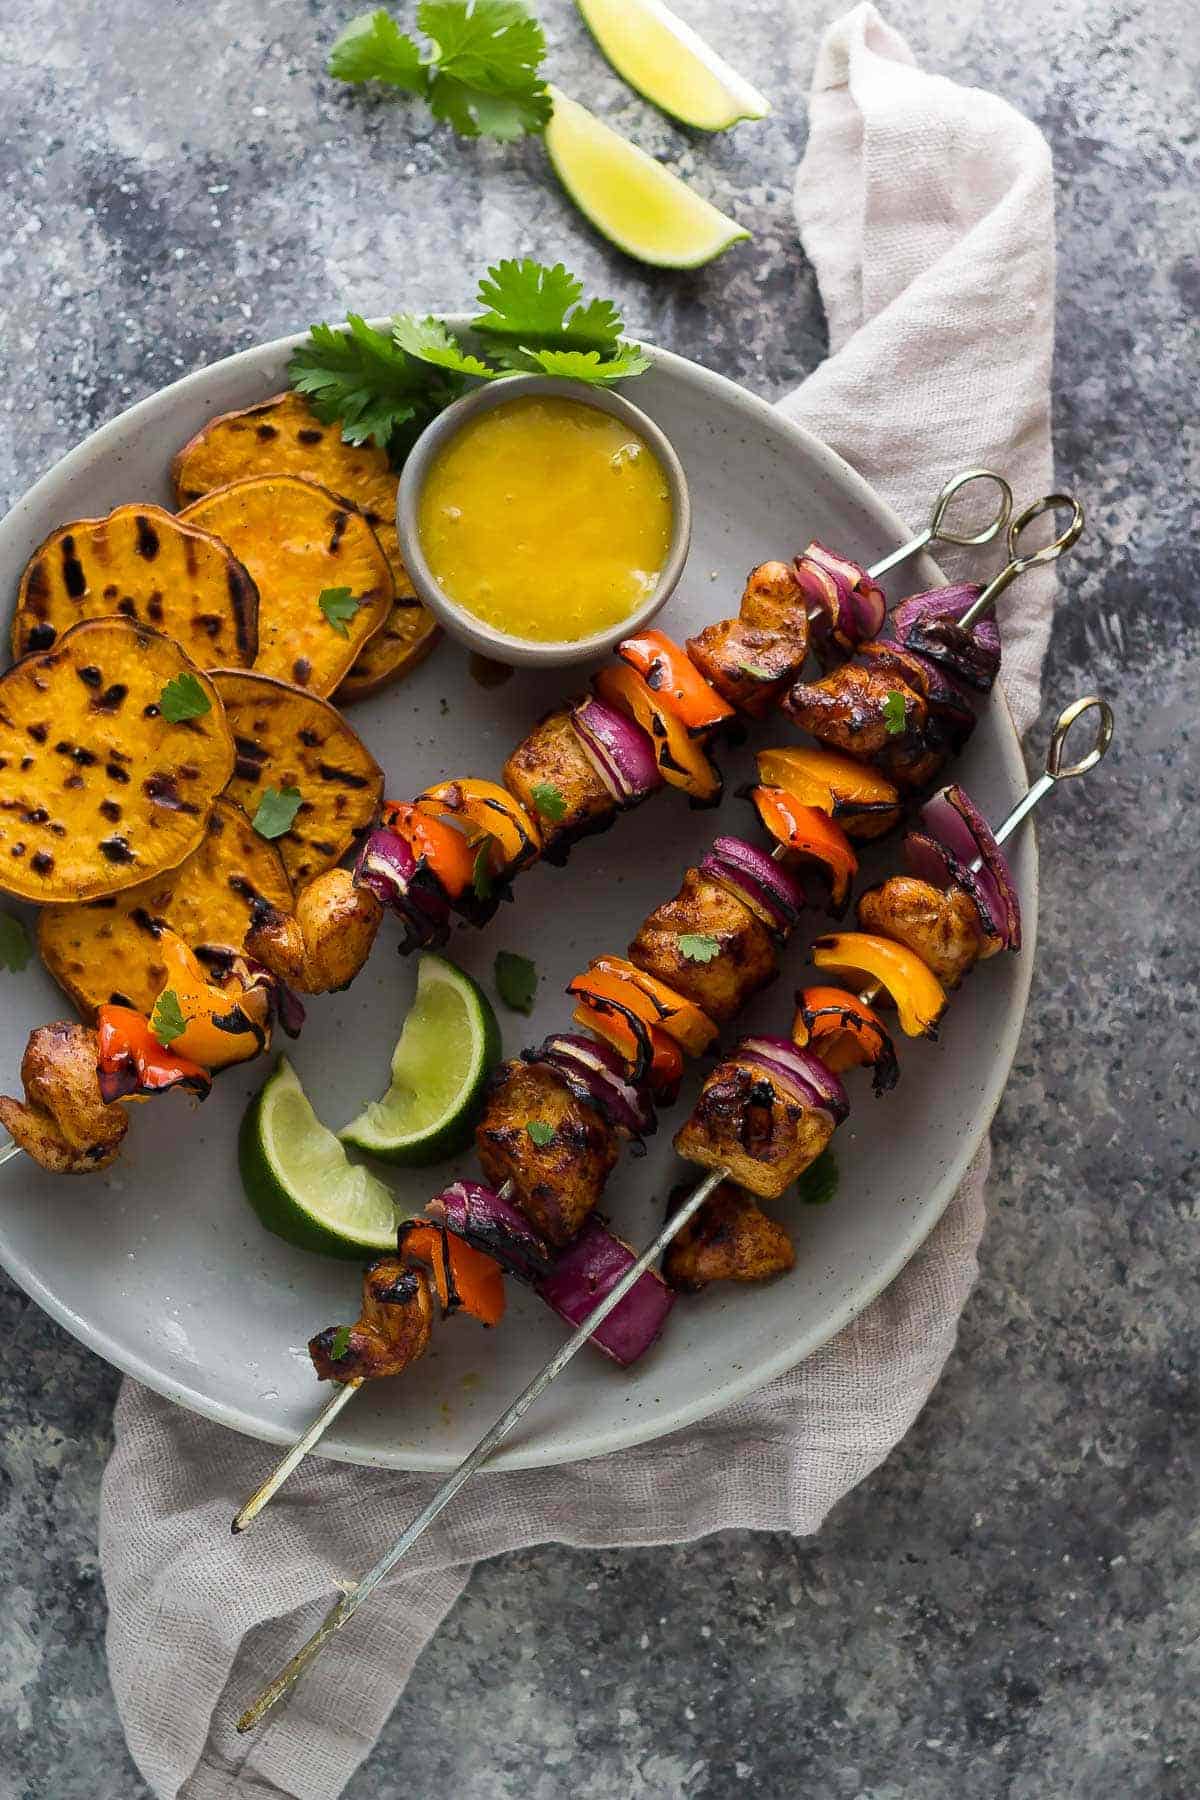 Plated Chili Lime Chicken Skewers with Mango Sauce and grilled sweet potato slices